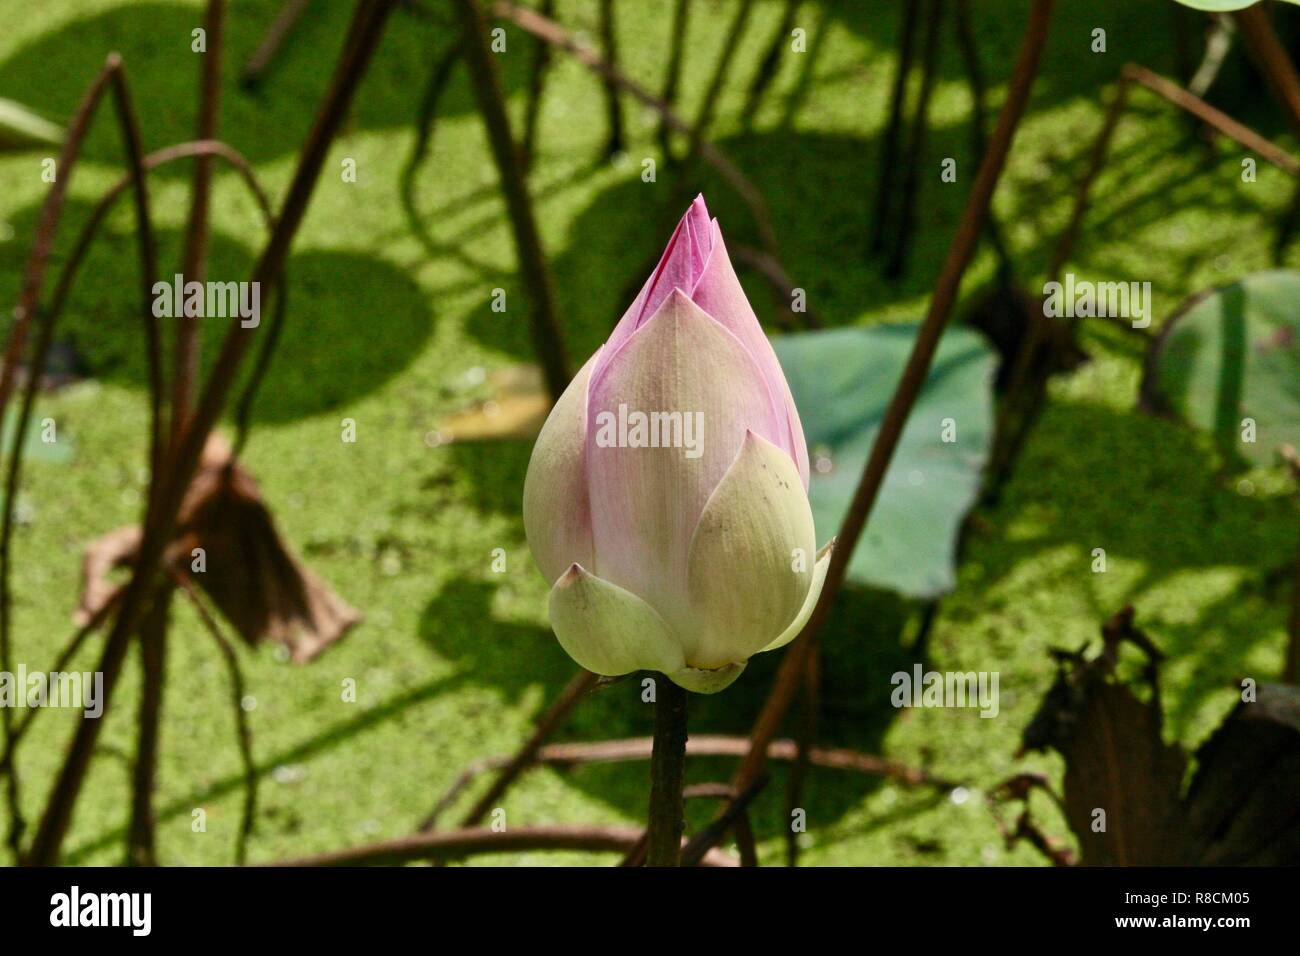 Lotus blossom closed bud on a pond with lily pads Stock Photo